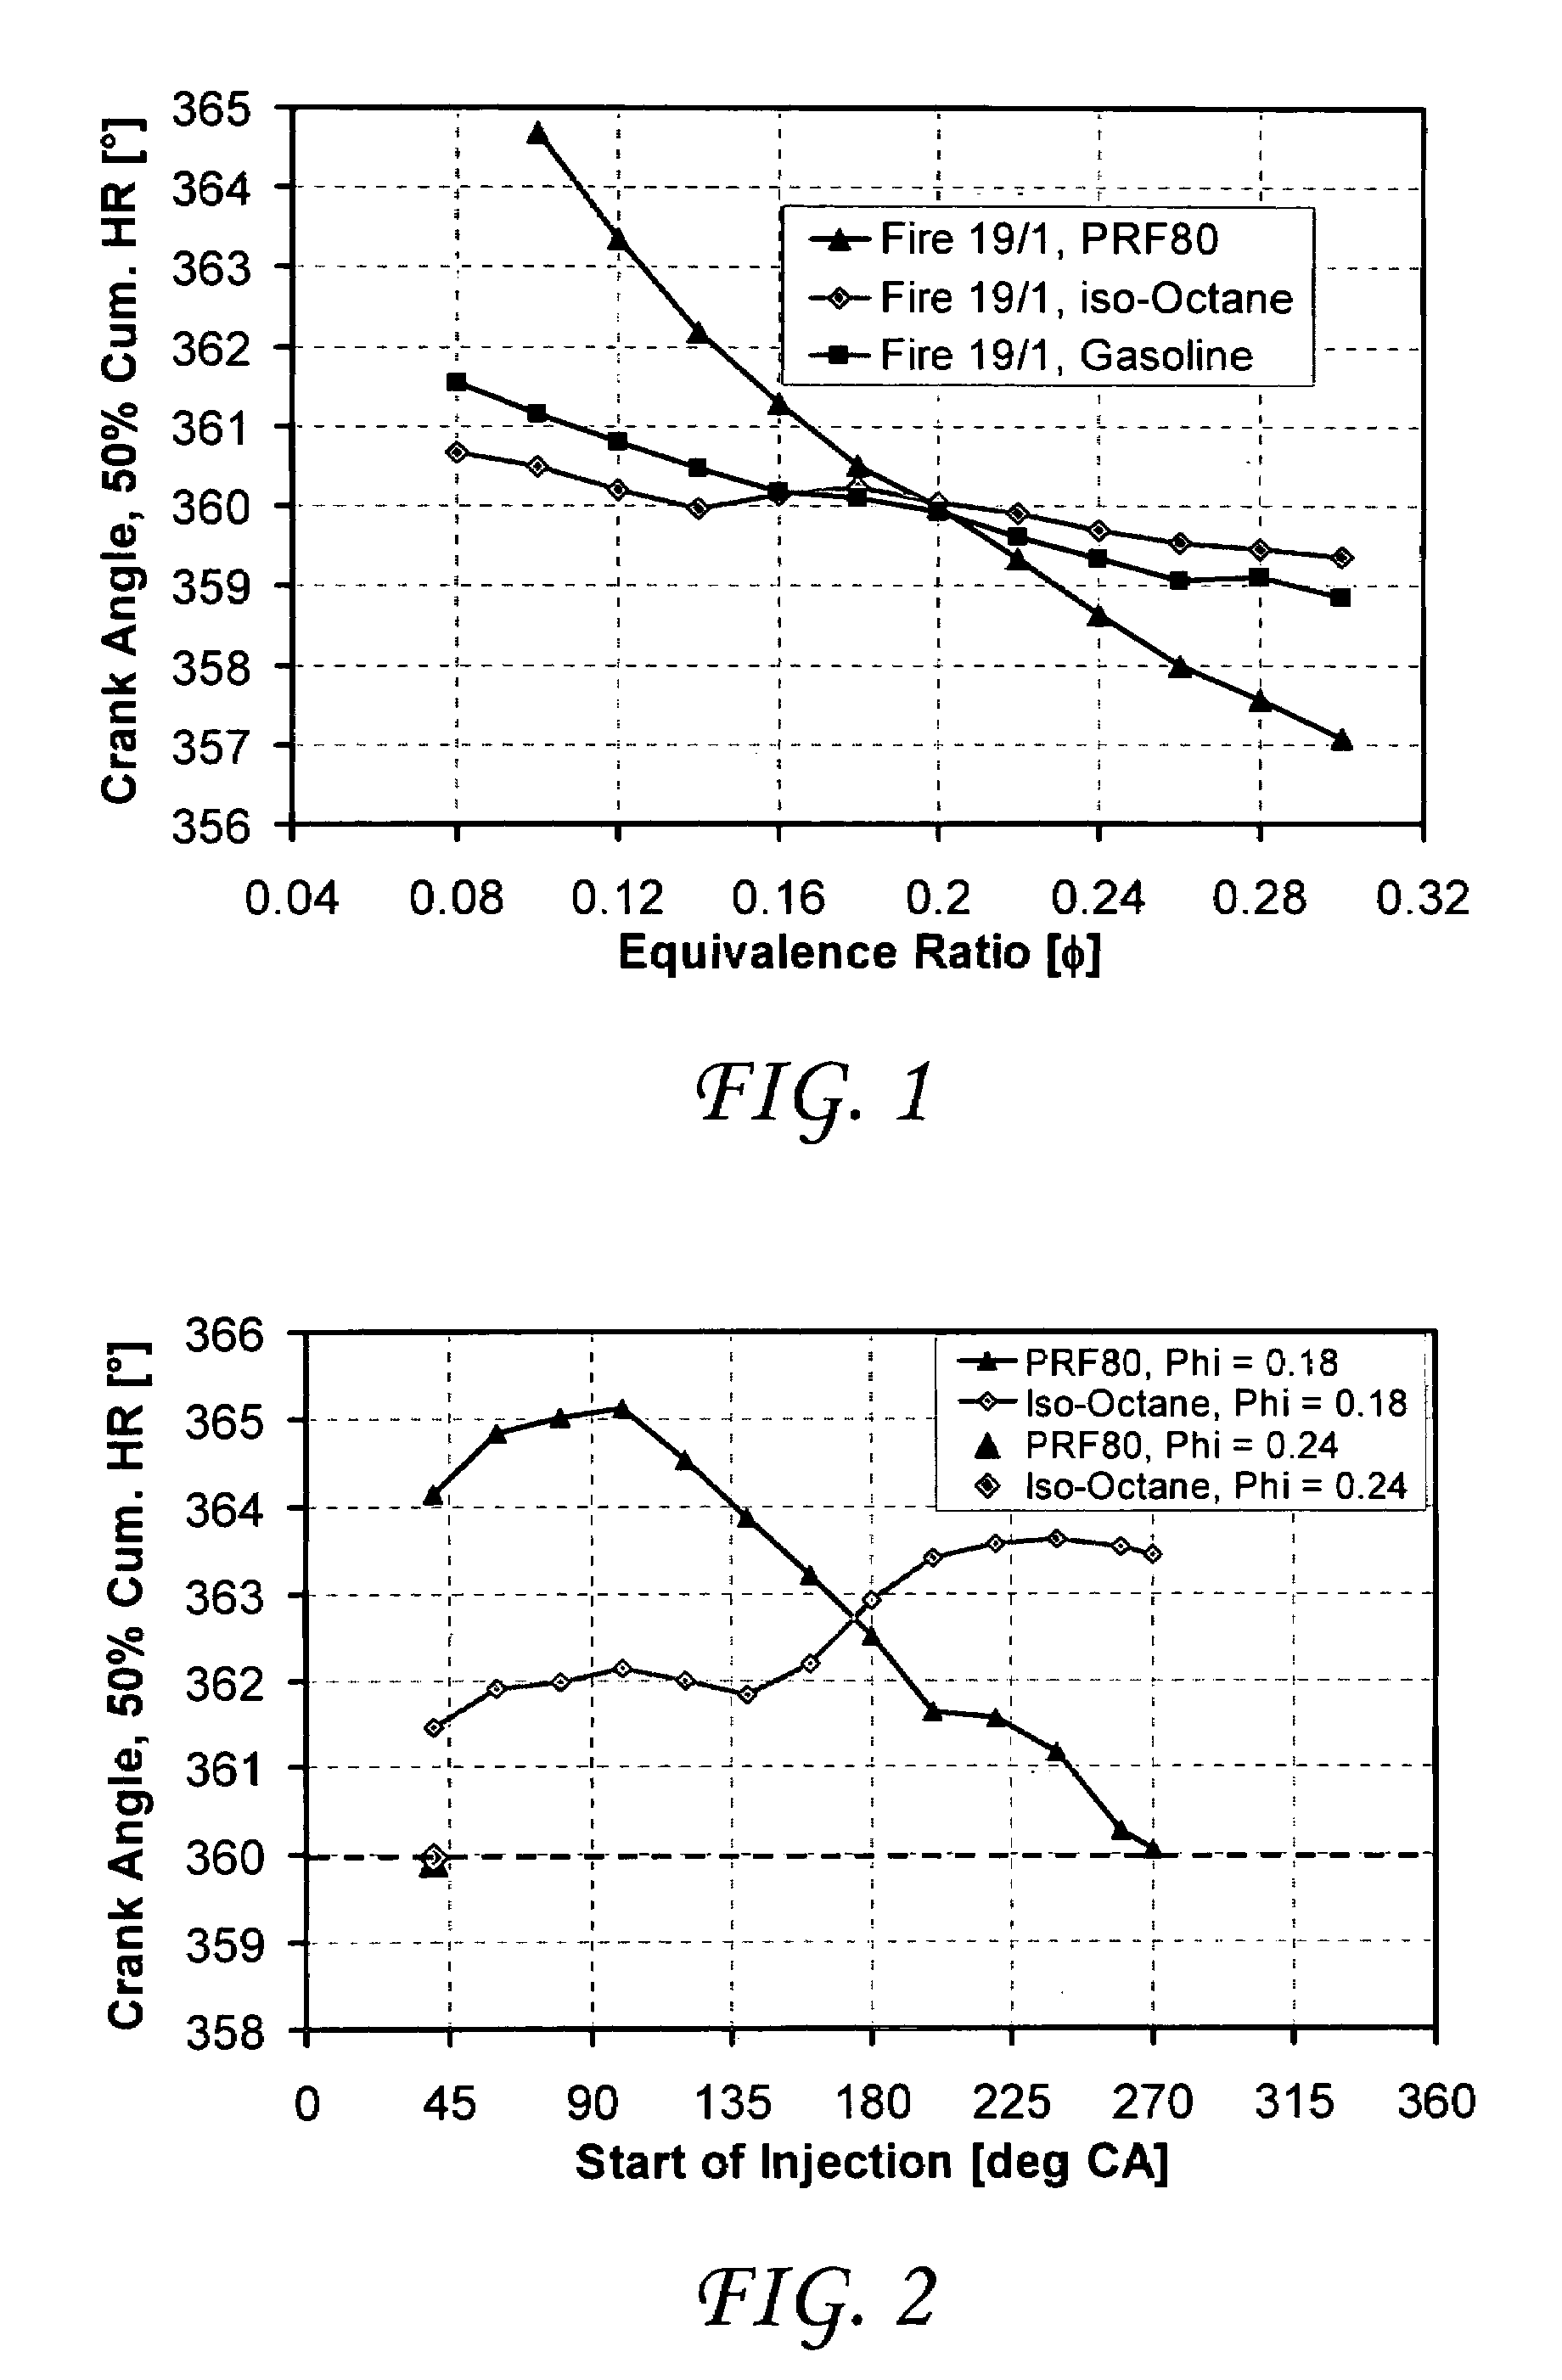 Fuel mixture stratification as a method for improving homogeneous charge compression ignition engine operation